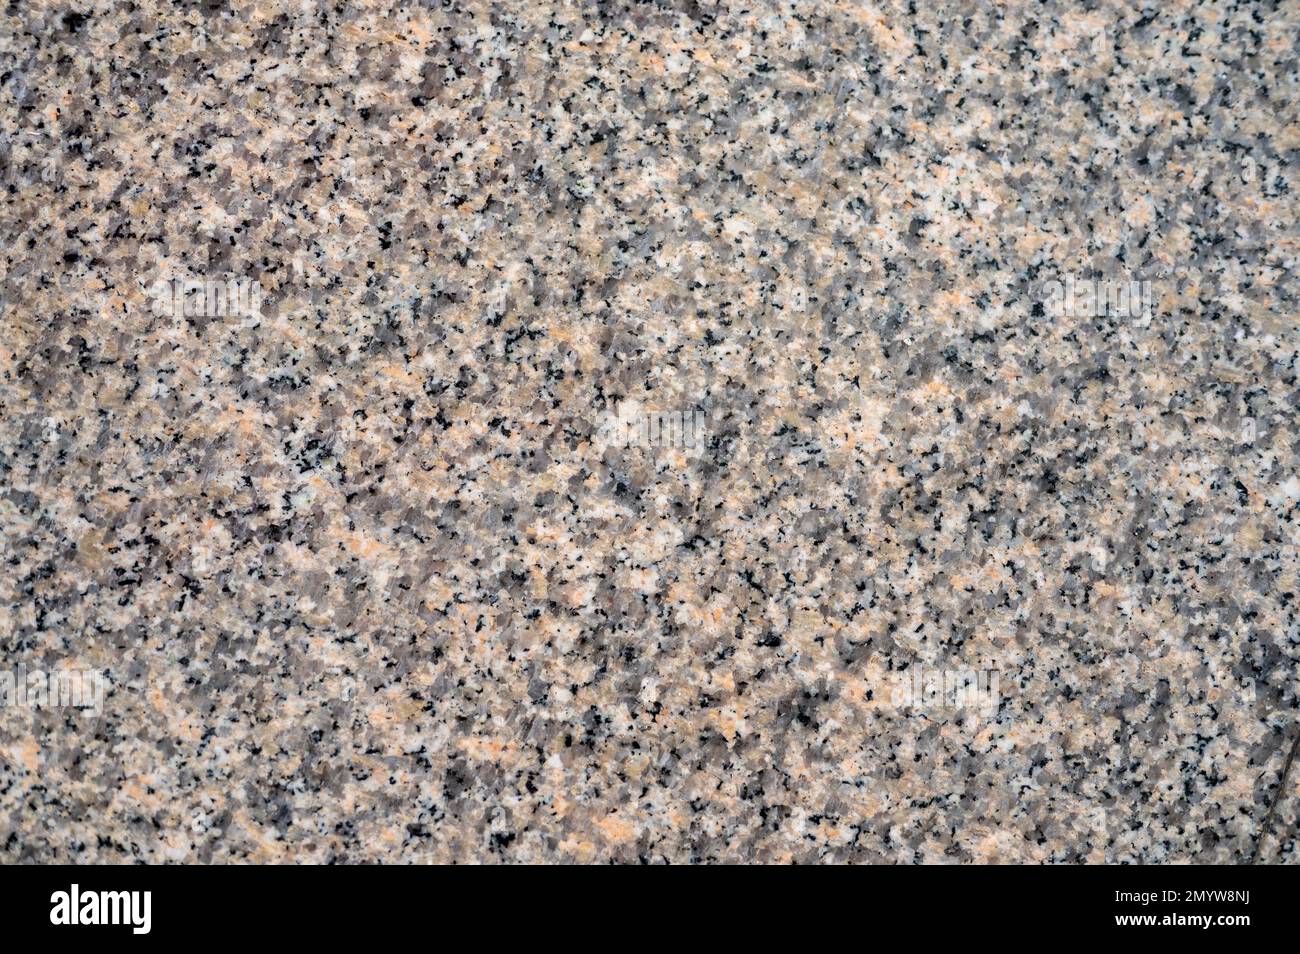 Seamless white quartz texture pattern. The subtle texture is tileable, best  for repeating countertop background surface. Quartz is an engineered stone  kitchen counter material unlike marble / granite. Stock Photo